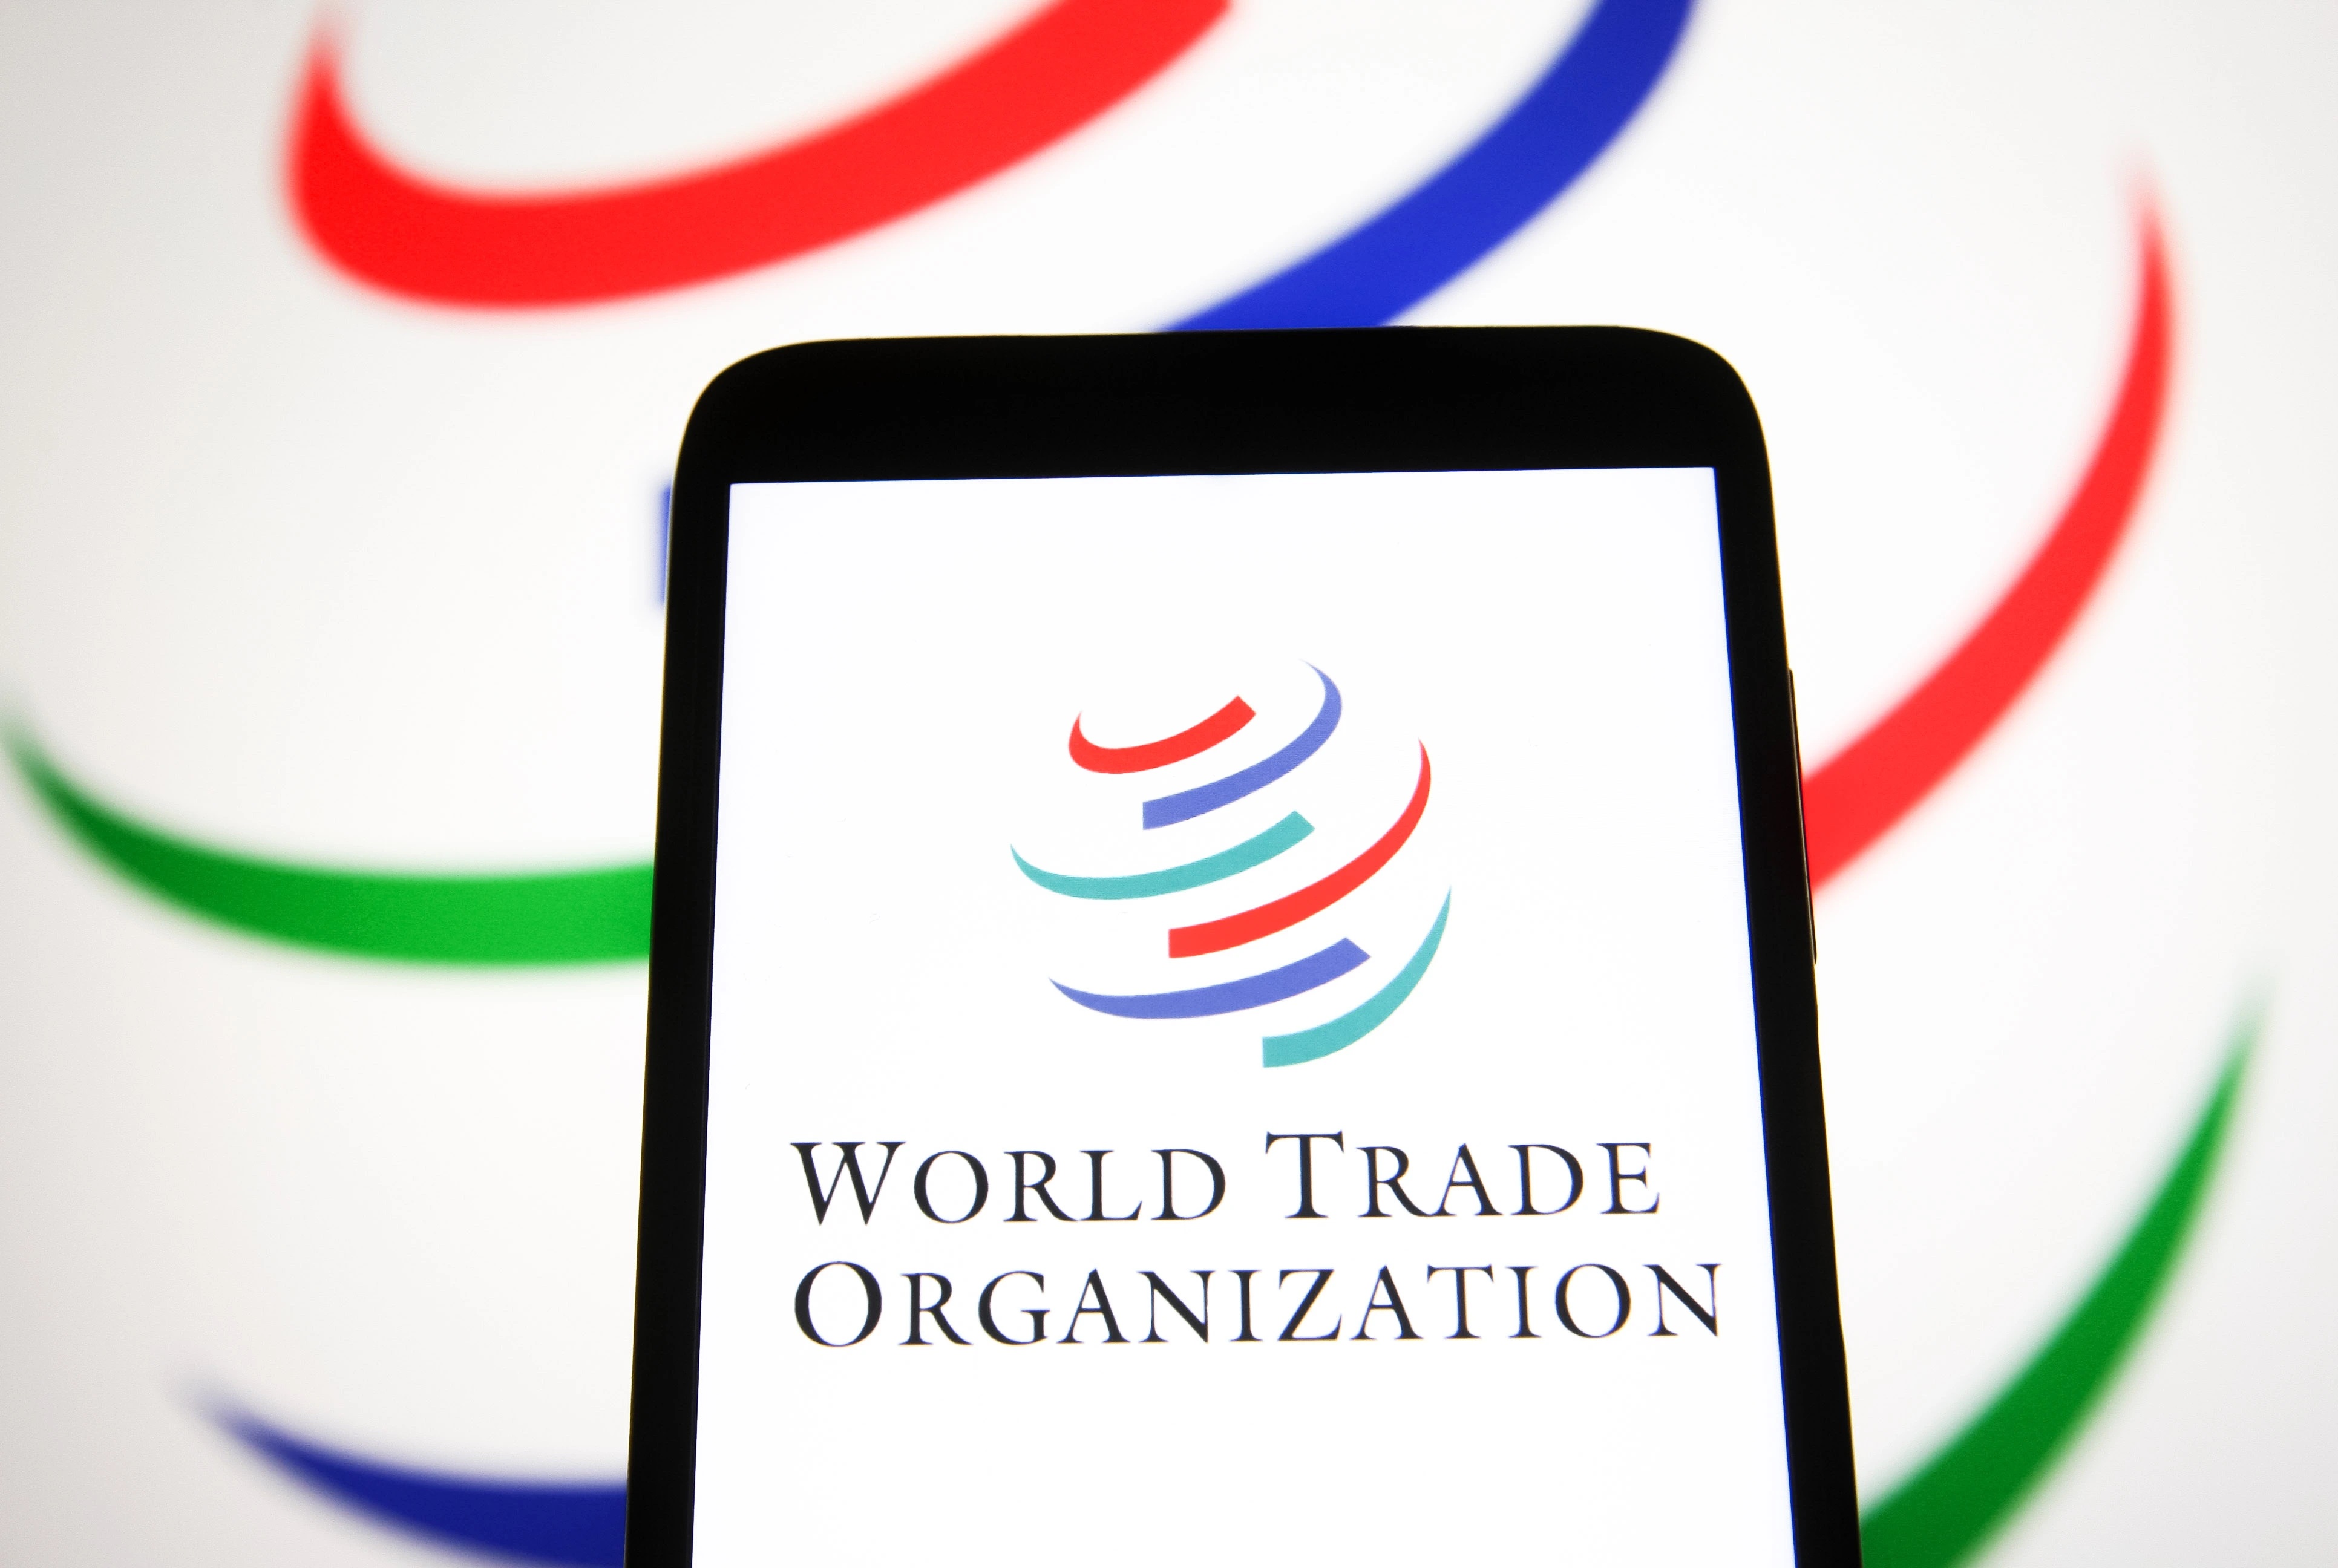 Regulatory norms for e commerce sector in focus among WTO members